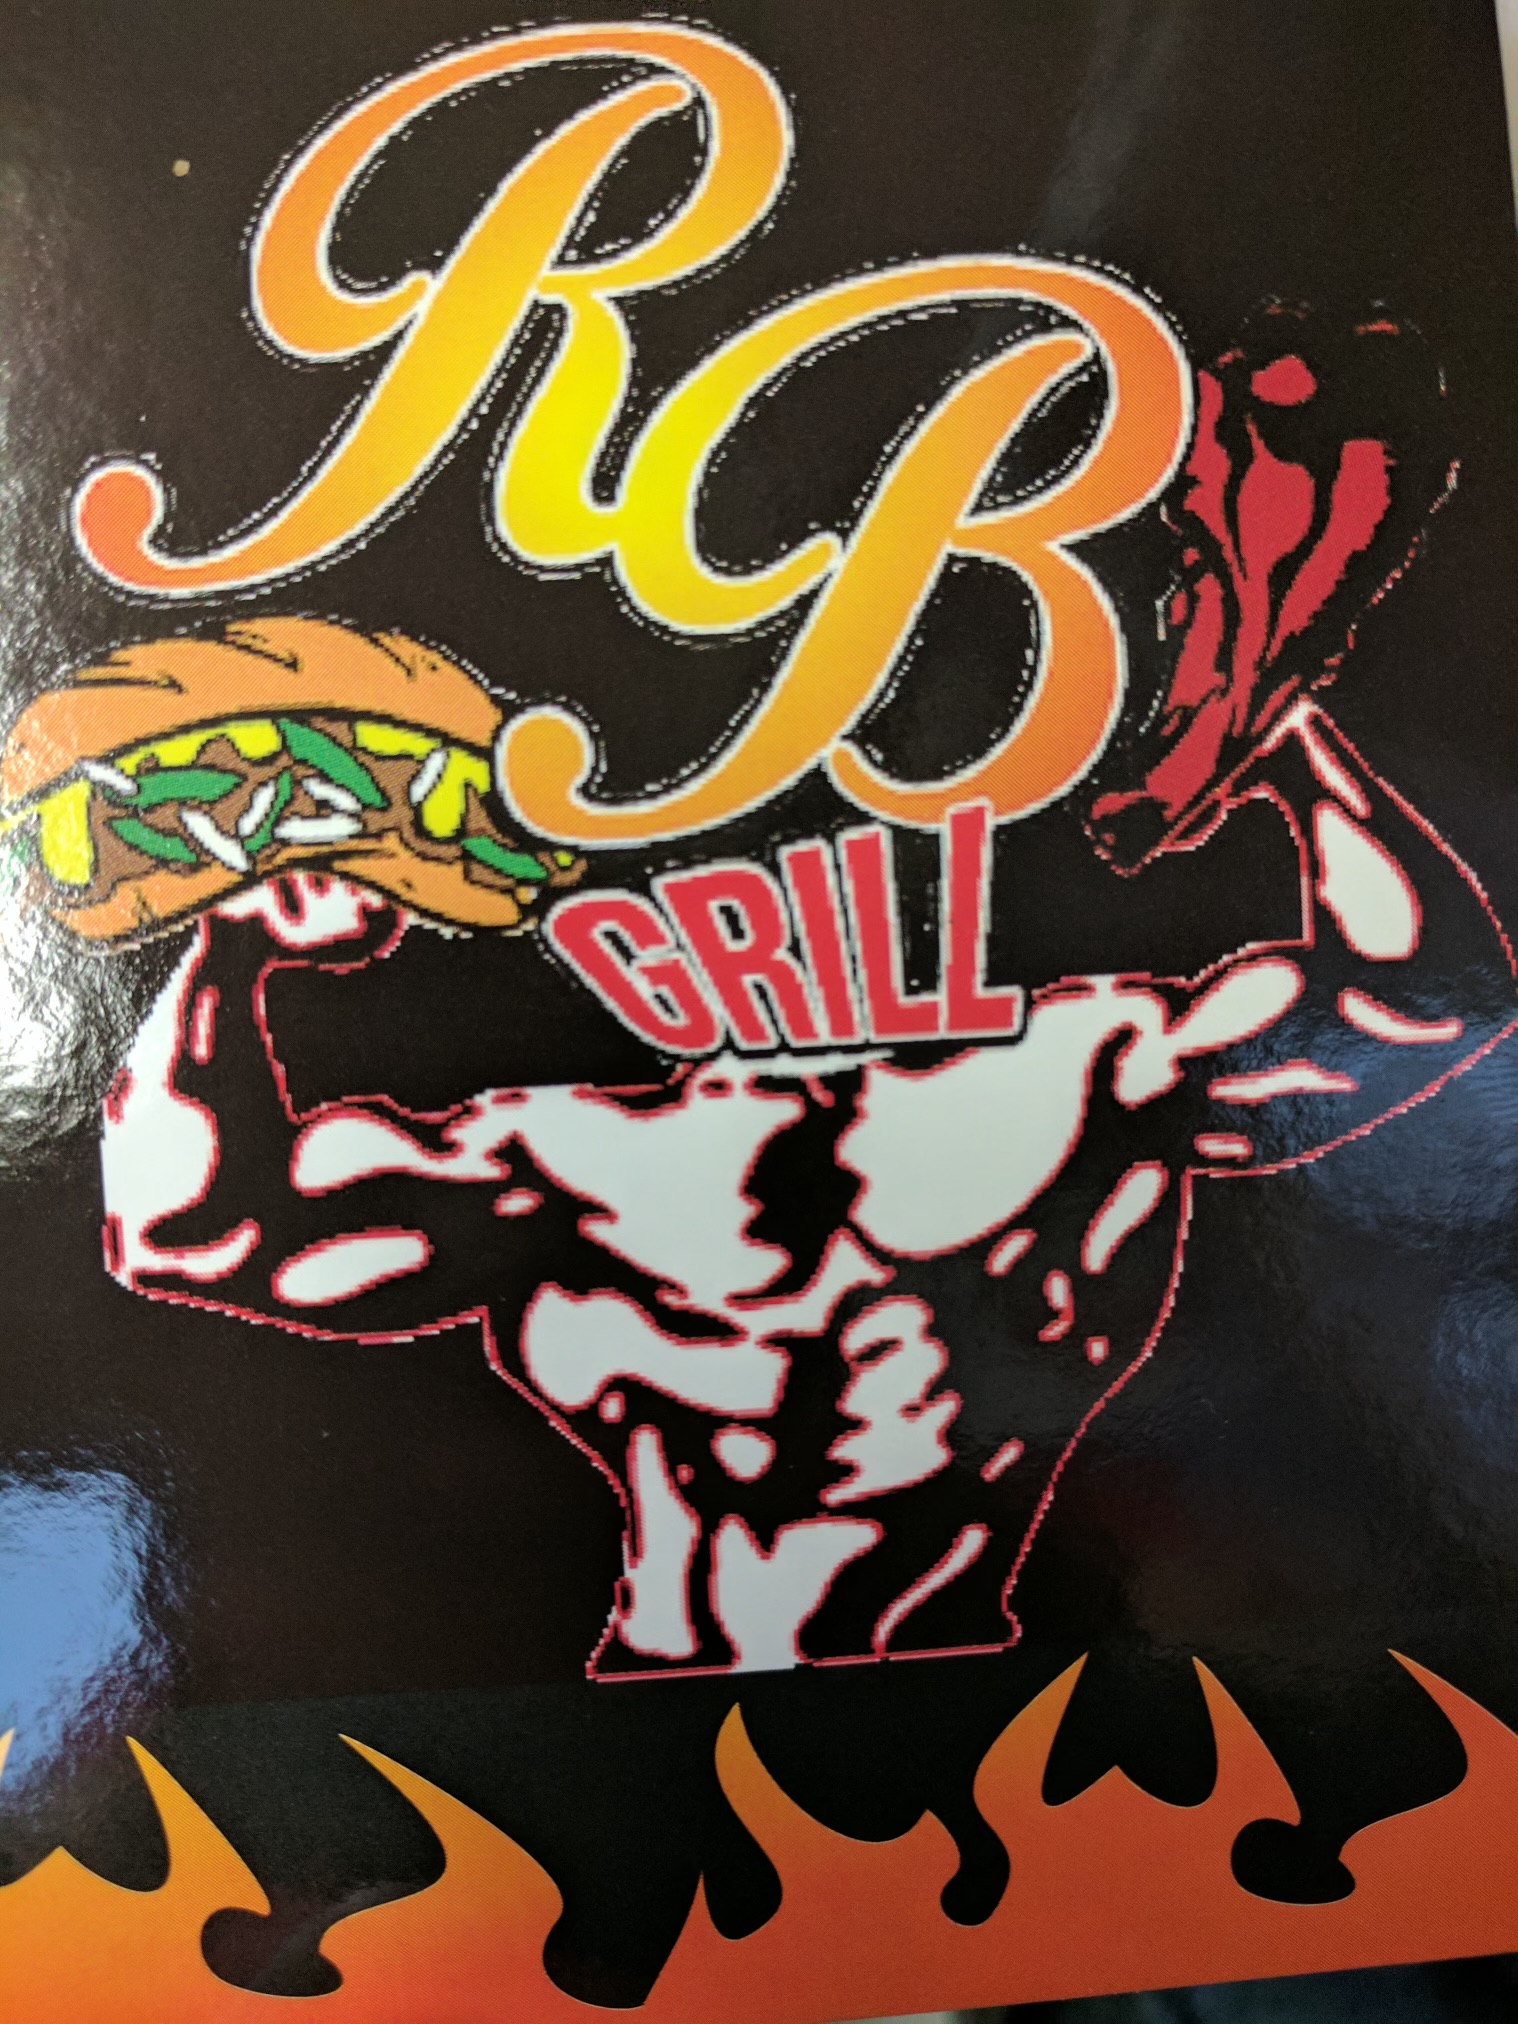 RB Grill